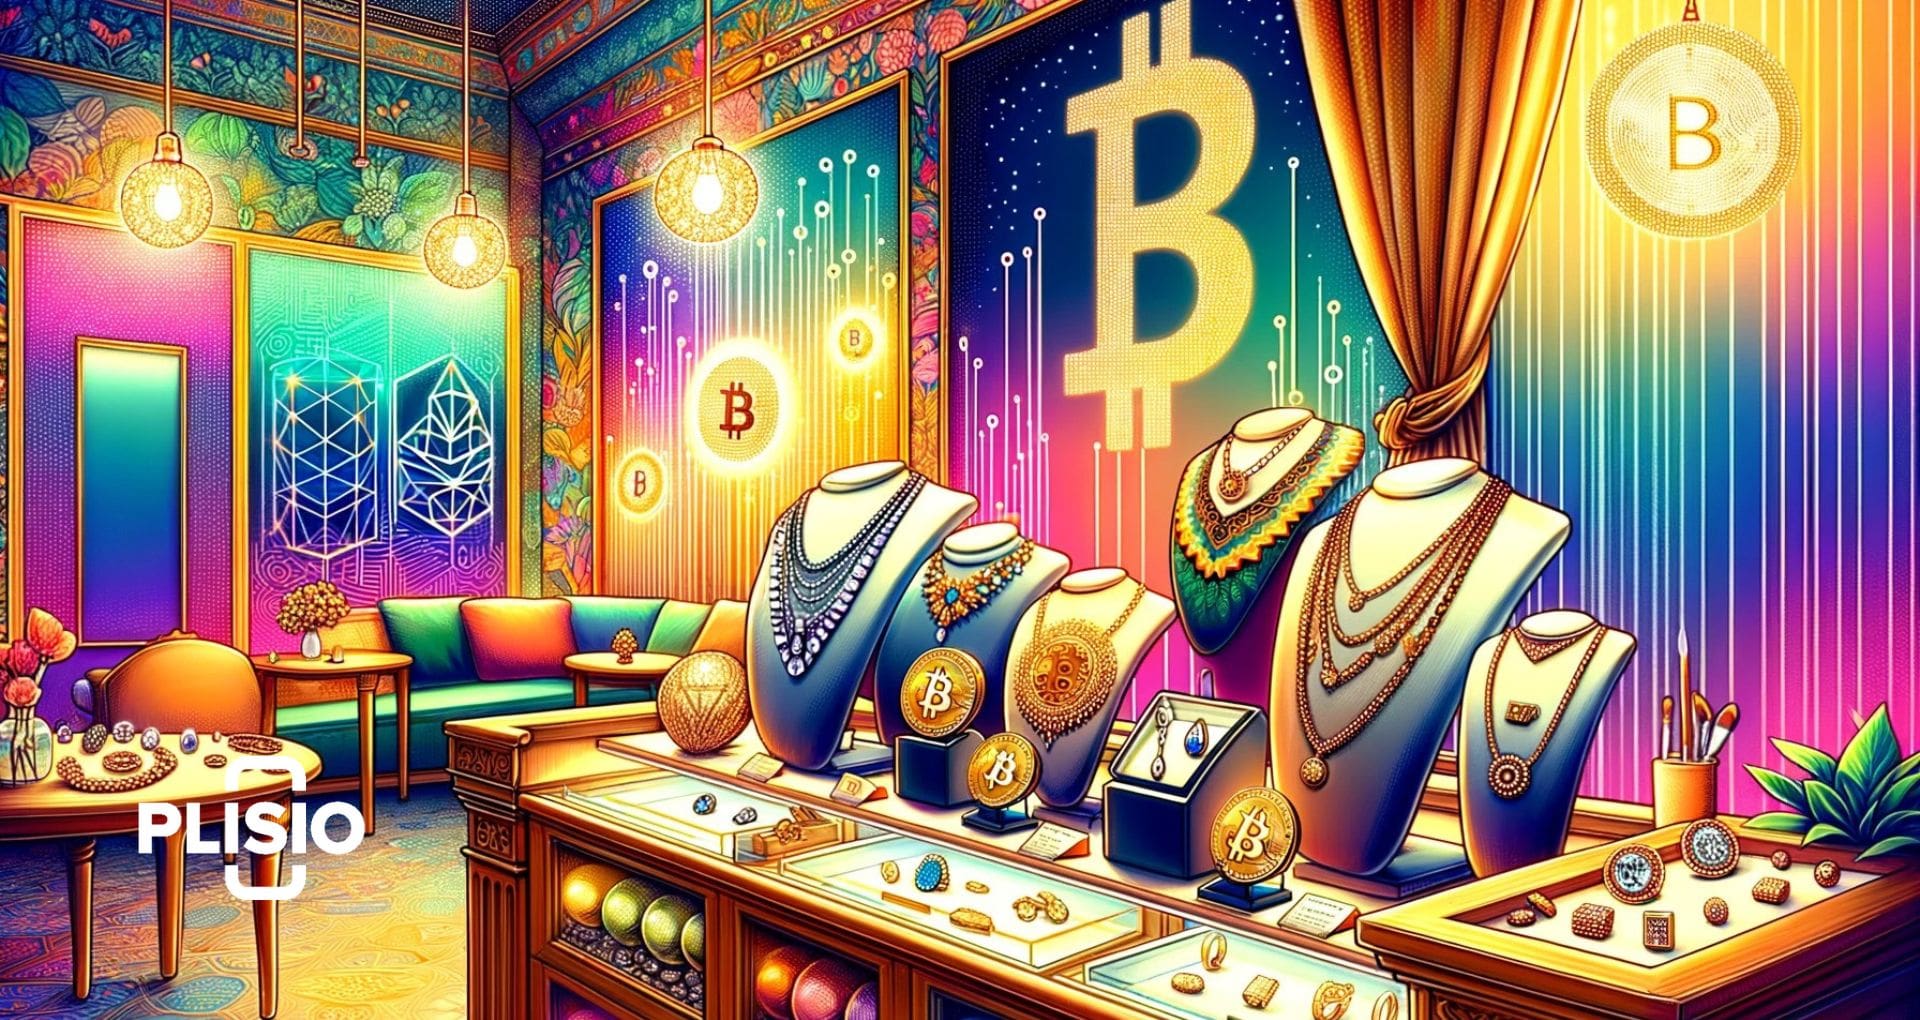 Accepts Bitcoin for Ethical, High-Quality Jewels